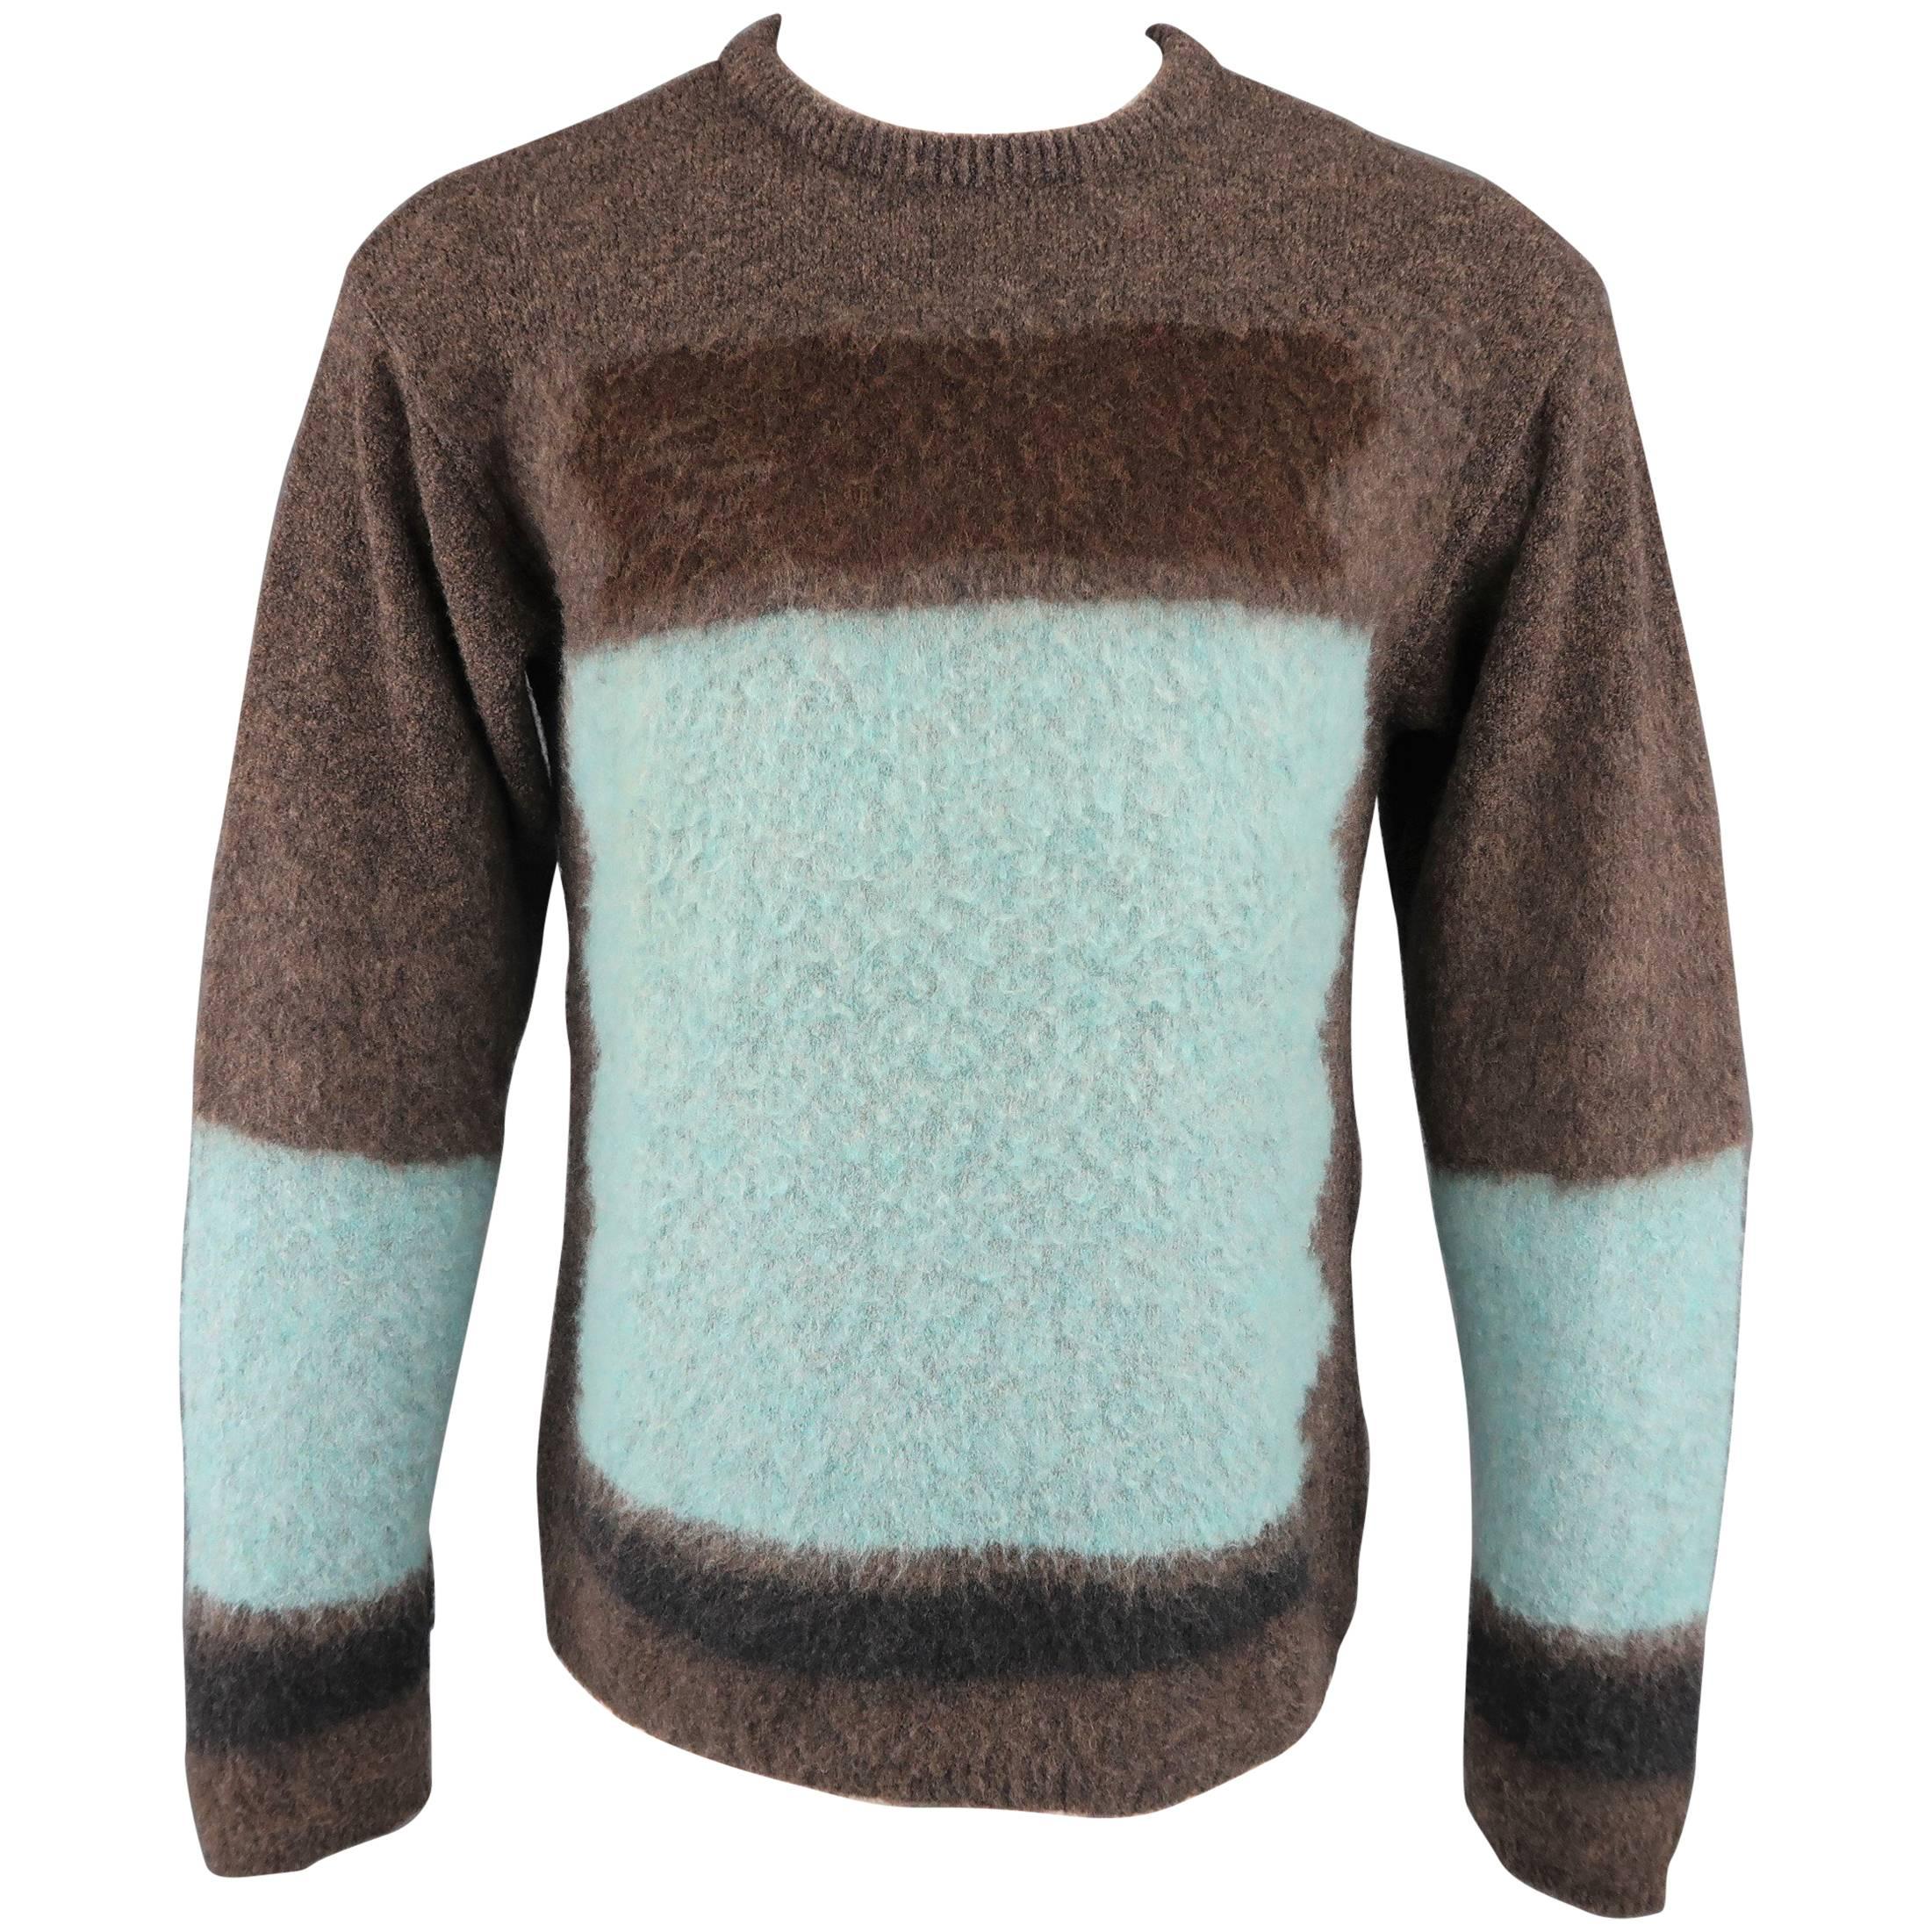 Gianni Versace Taupe and Aqua Blue Color Block Textured Pullover Sweater